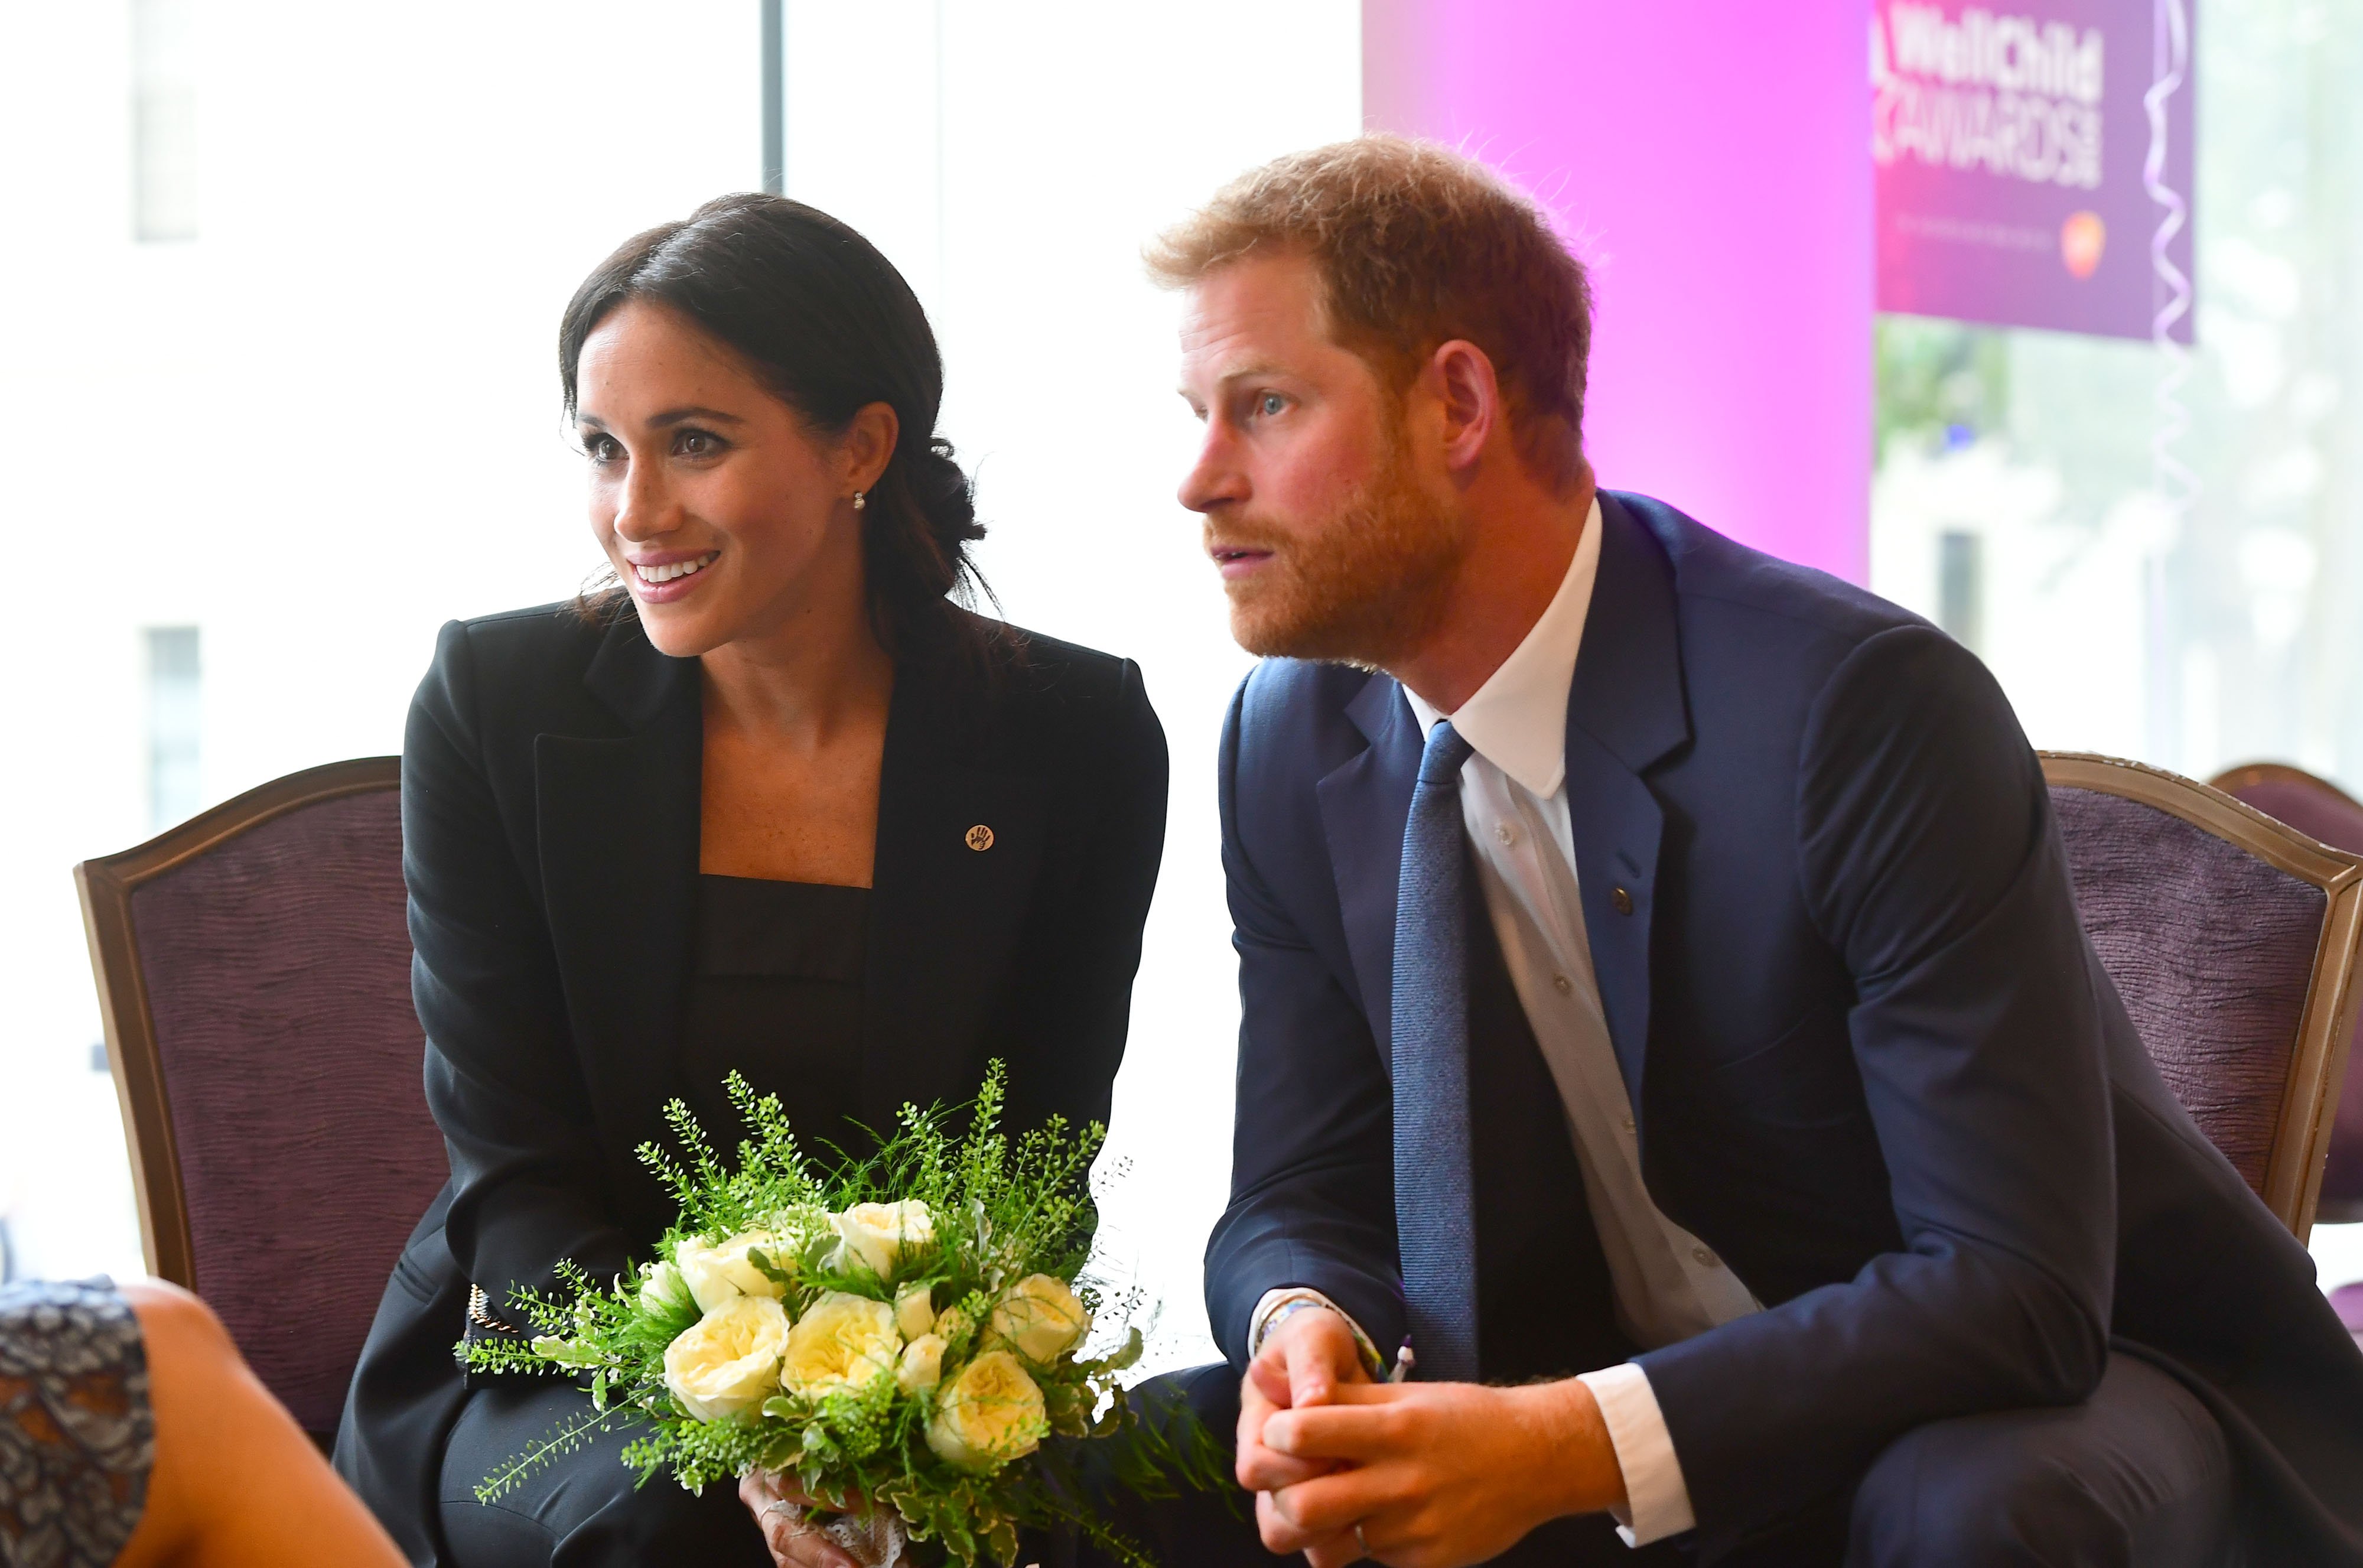 Meghan, Duchess of Sussex and Prince Harry, Duke of Sussex attend the WellChild awards at Royal Lancaster Hotel on September 4, 2018 in London, England. The Duke of Sussex has been patron of WellChild since 2007. | Source: Getty Images